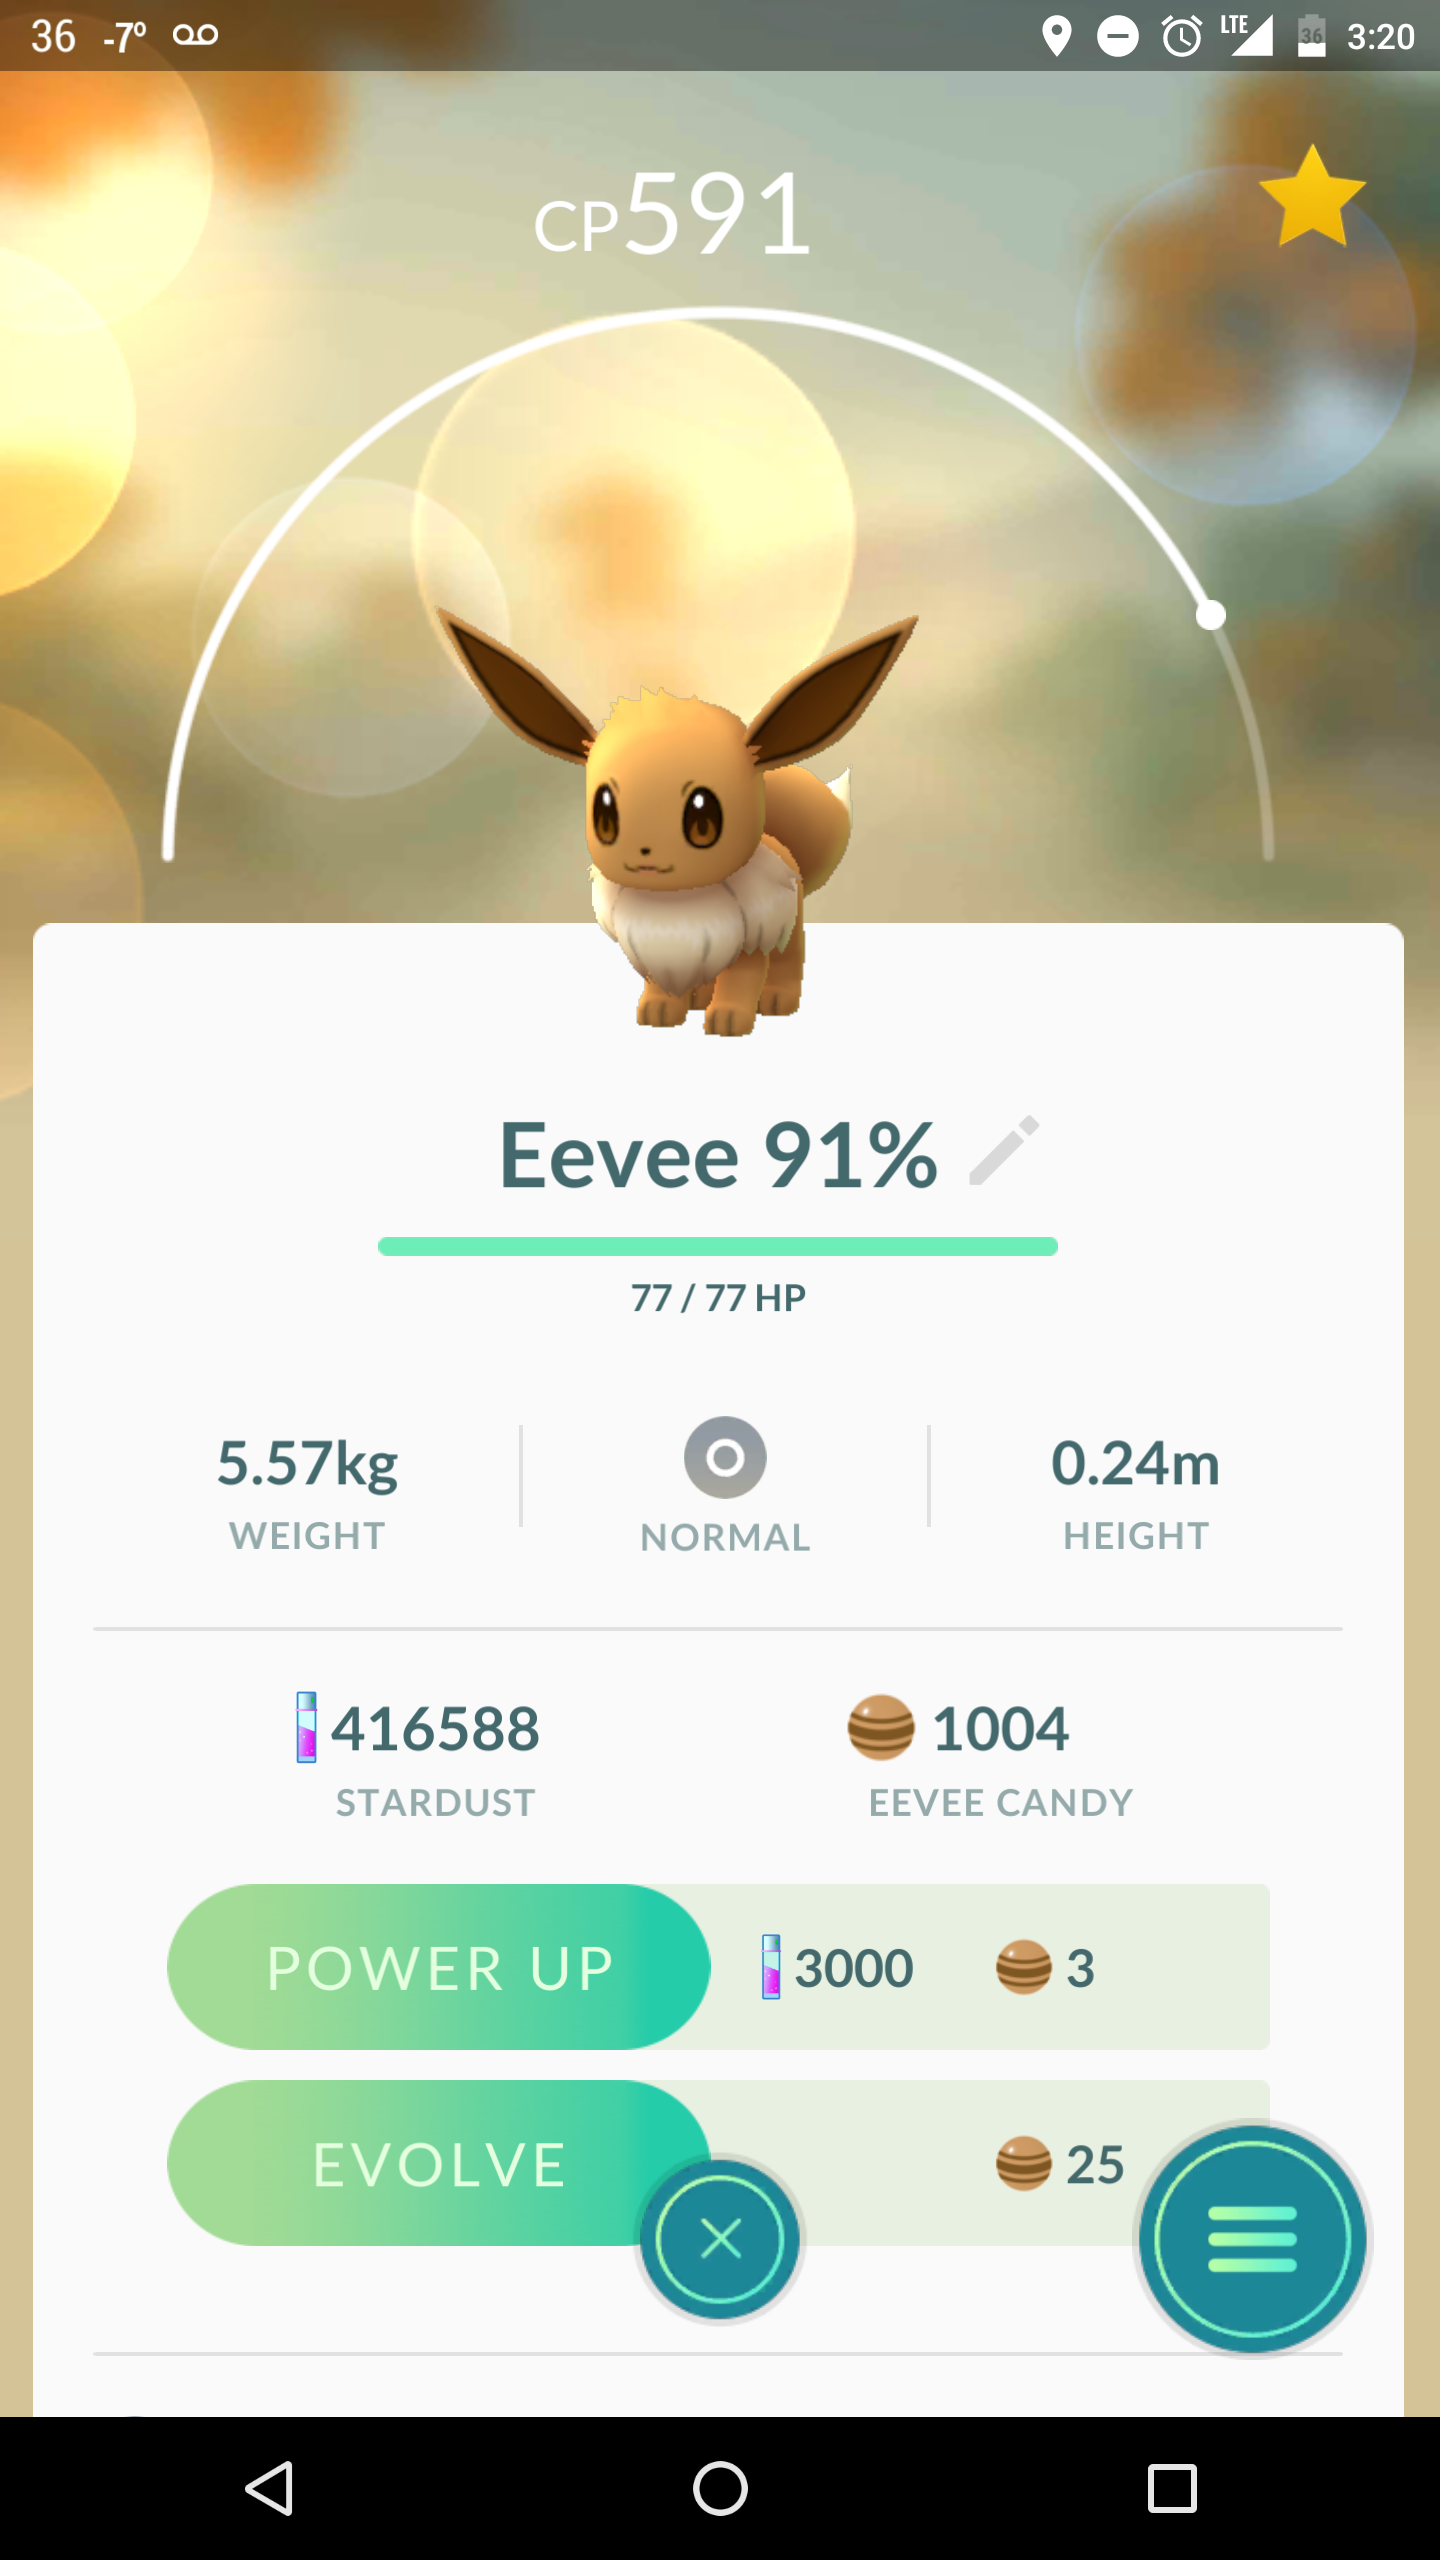 After months of hoarding Eevee candies I